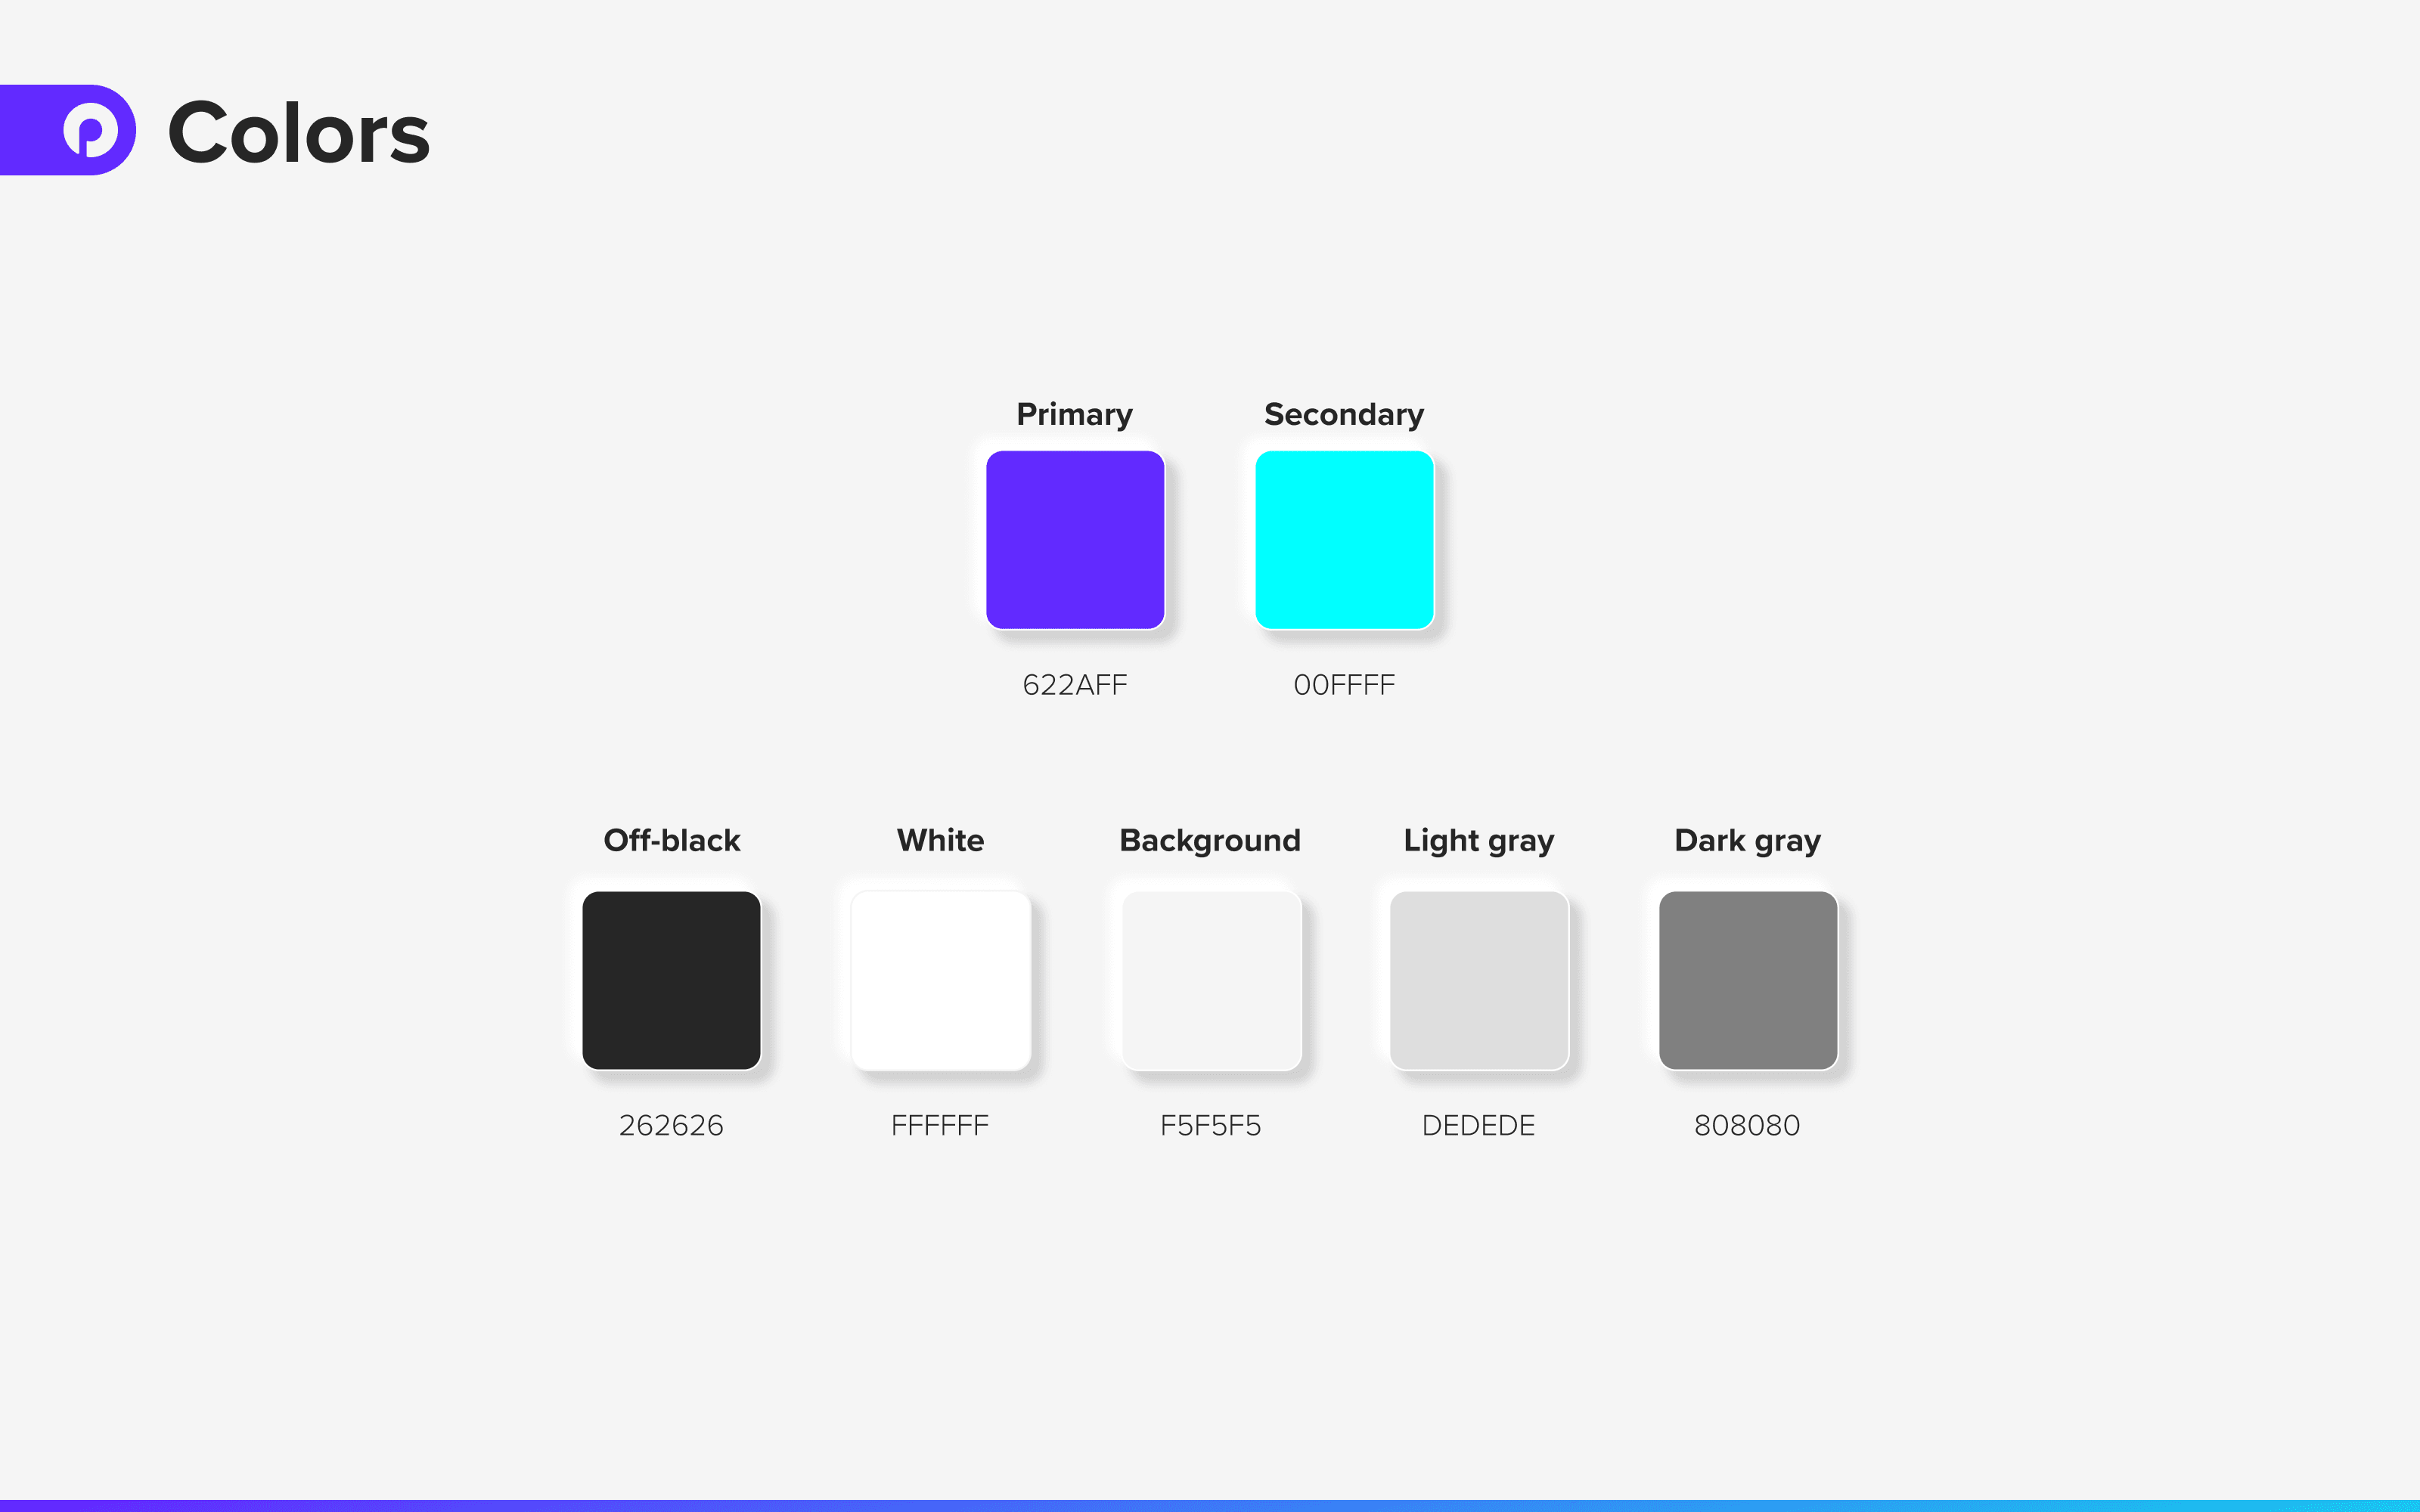 Light gray slide with colors. Primary - purple. Secondary - cyan. Grayscale palette: off-black, white, background gray, light gray, dark gray.